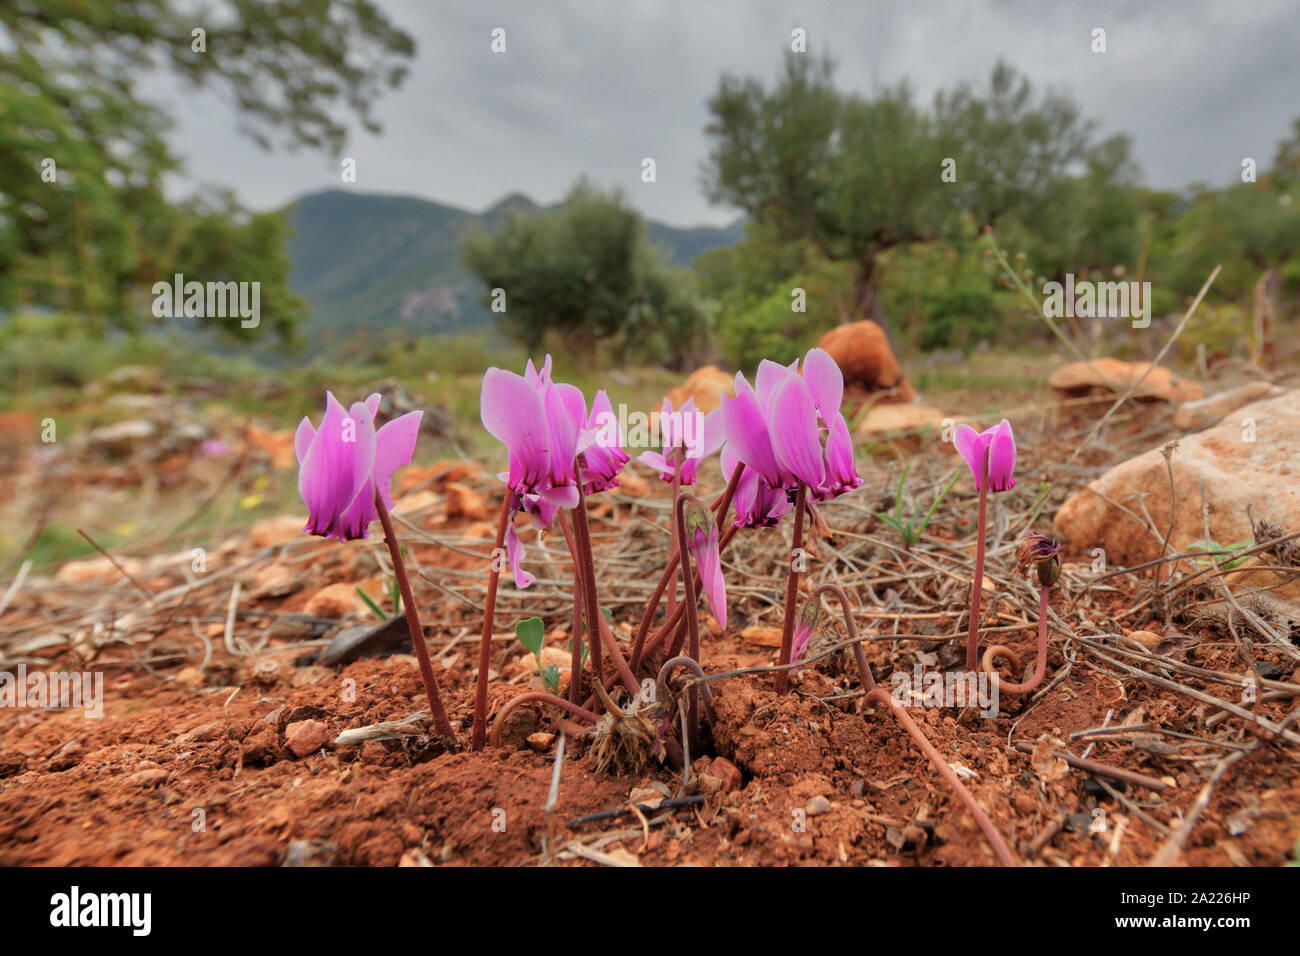 Group of Ivy-leaved cyclamen or sowbread (Cyclamen hederifolium) in olive orchard environment on Peloponnese peninsula, Greece Stock Photo